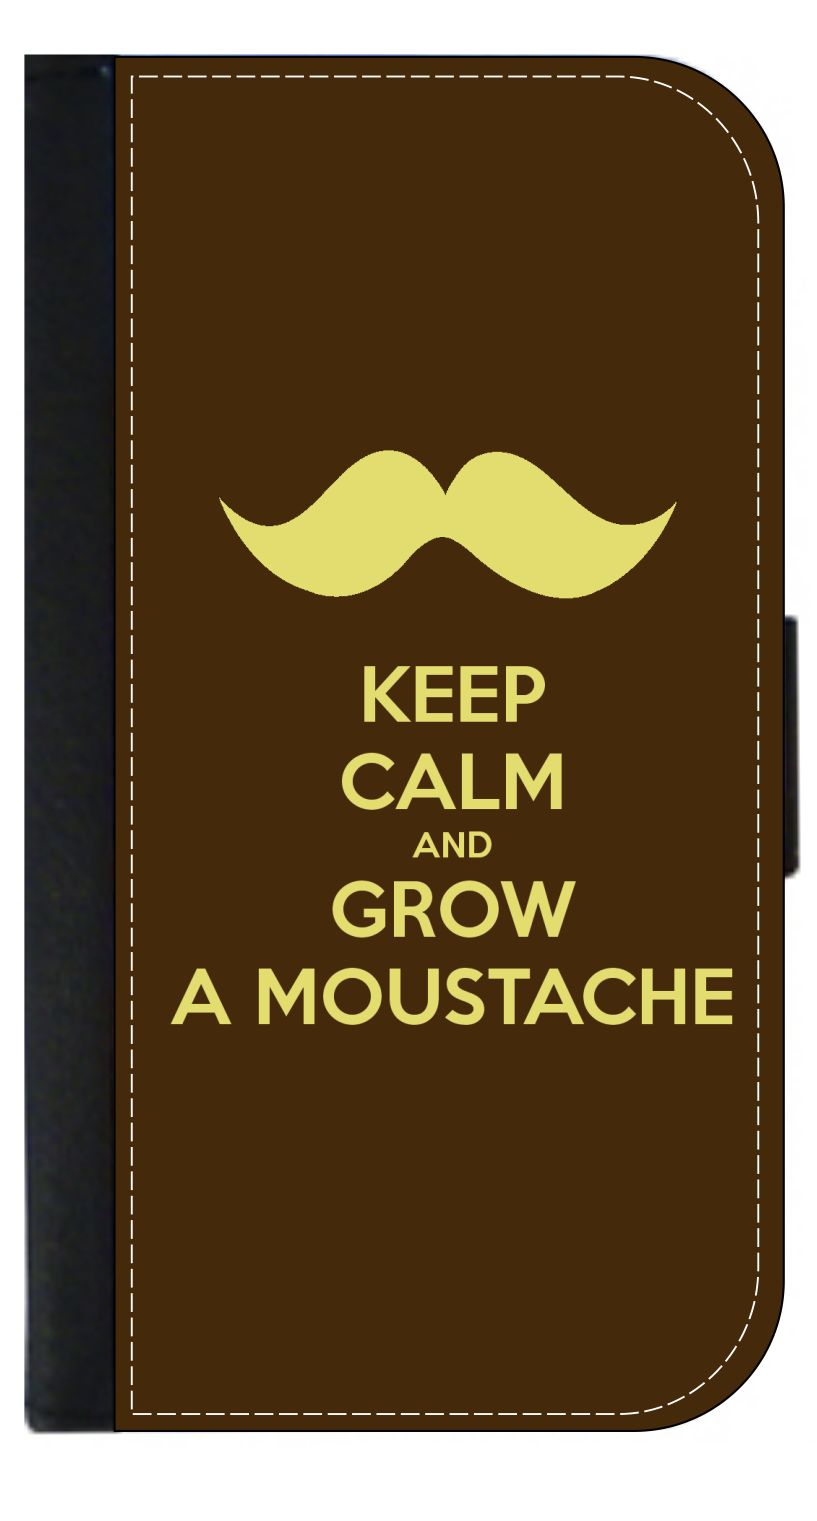 Keep Calm and Grow a Mustache Quote - Galaxy s10p Case - Galaxy s10 Plus Case - Galaxy s10 Plus Wallet Case - s10 Plus Case Wallet - Galaxy s10 Plus Case Wallet - s10 Plus Case Flip Cover - image 1 of 3